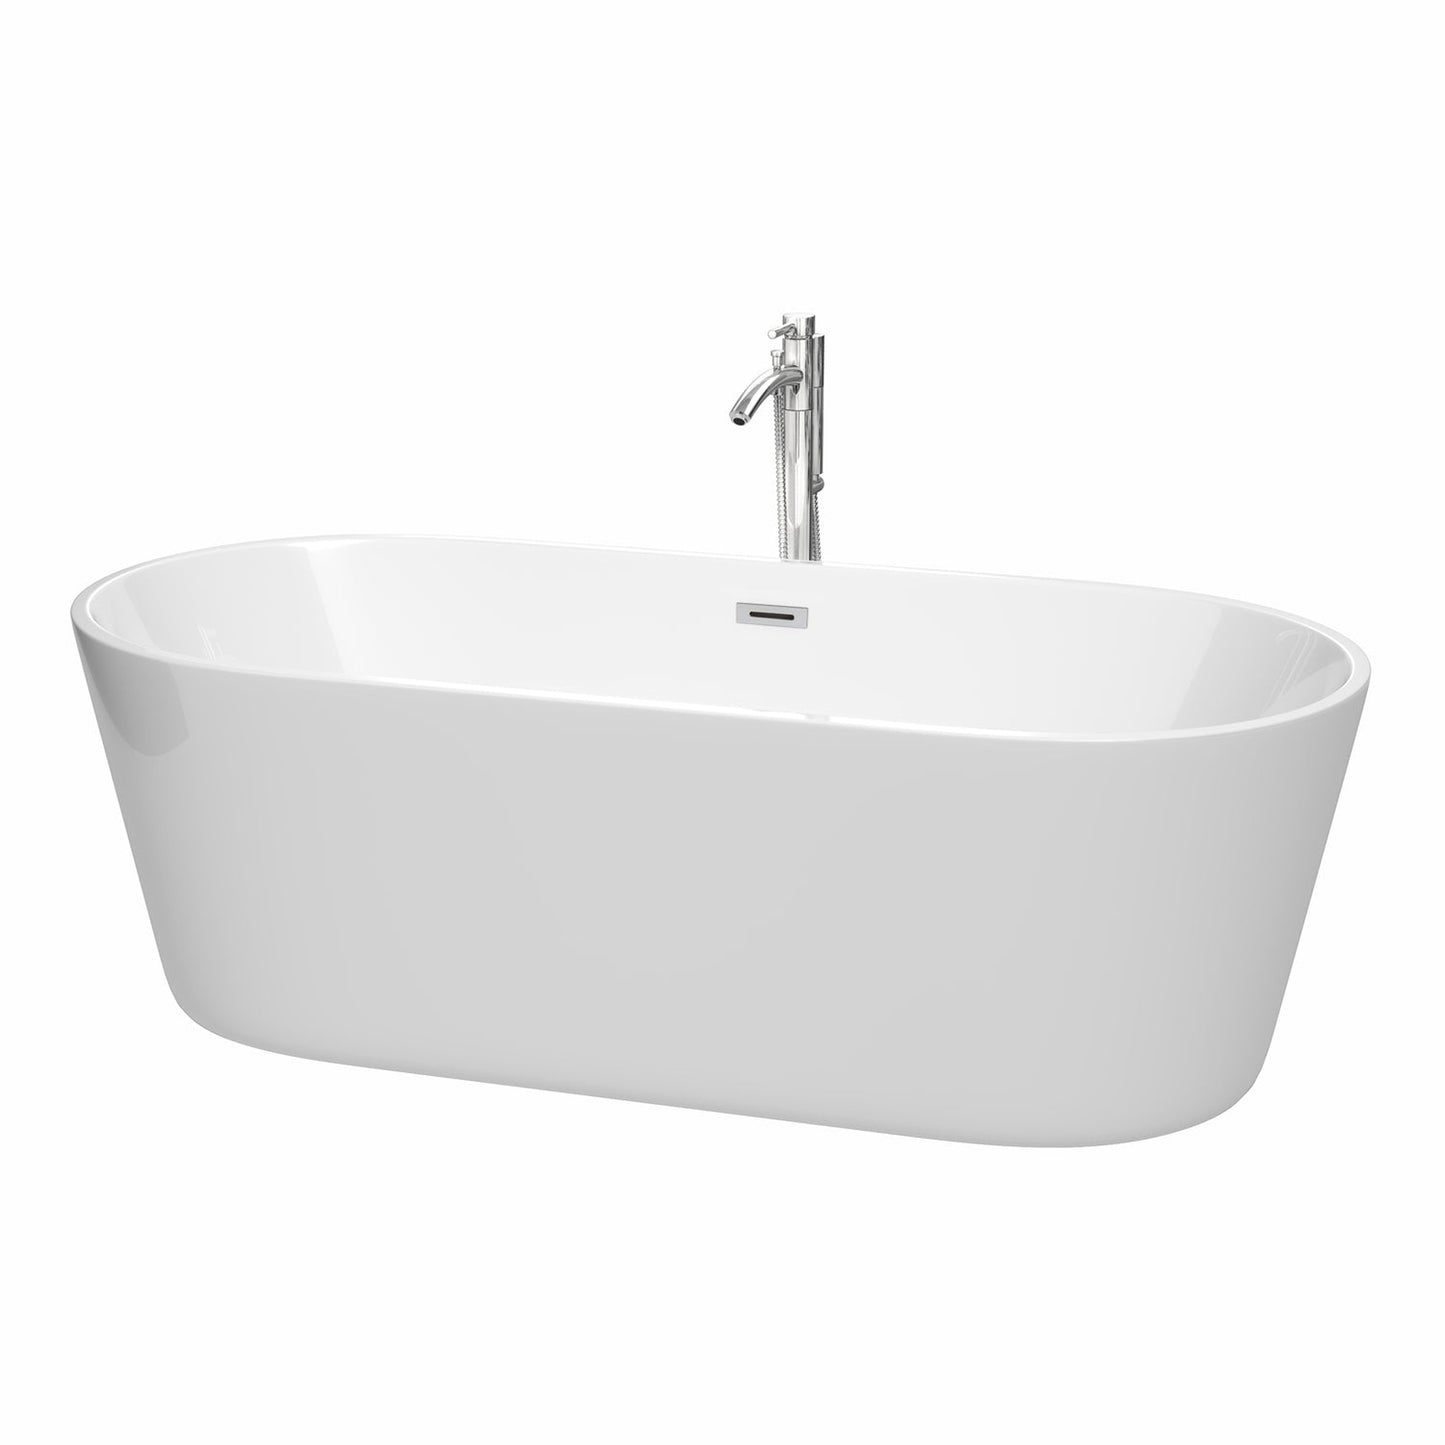 Wyndham Collection Carissa 71" Freestanding Bathtub in White With Floor Mounted Faucet, Drain and Overflow Trim in Polished Chrome